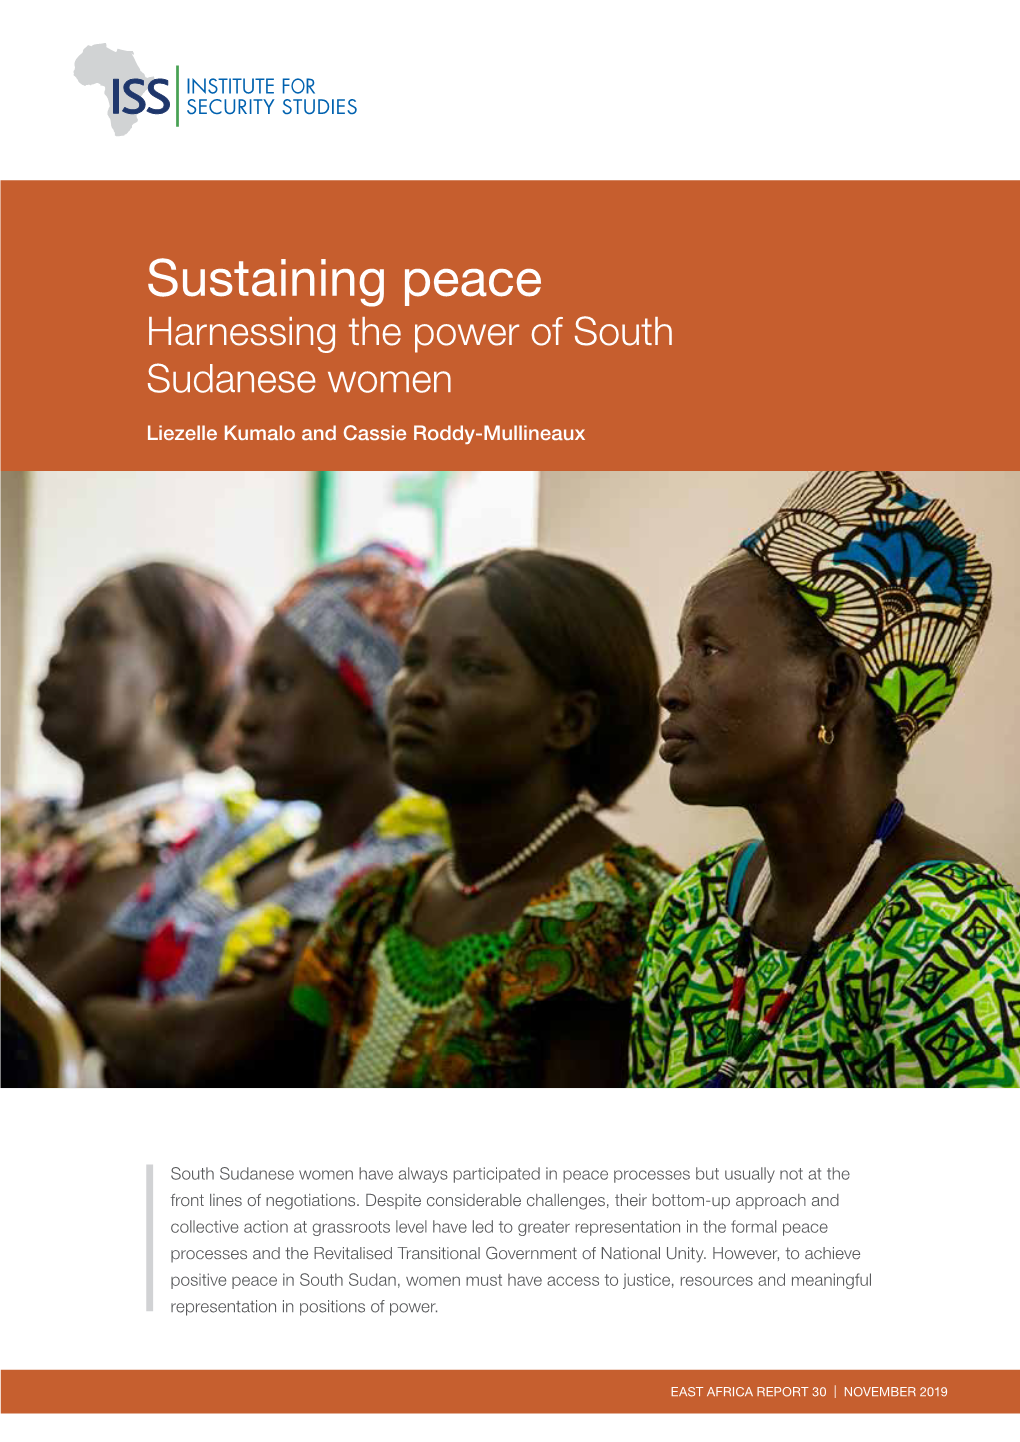 Sustaining Peace: Harnessing the Power of South Sudanese Women